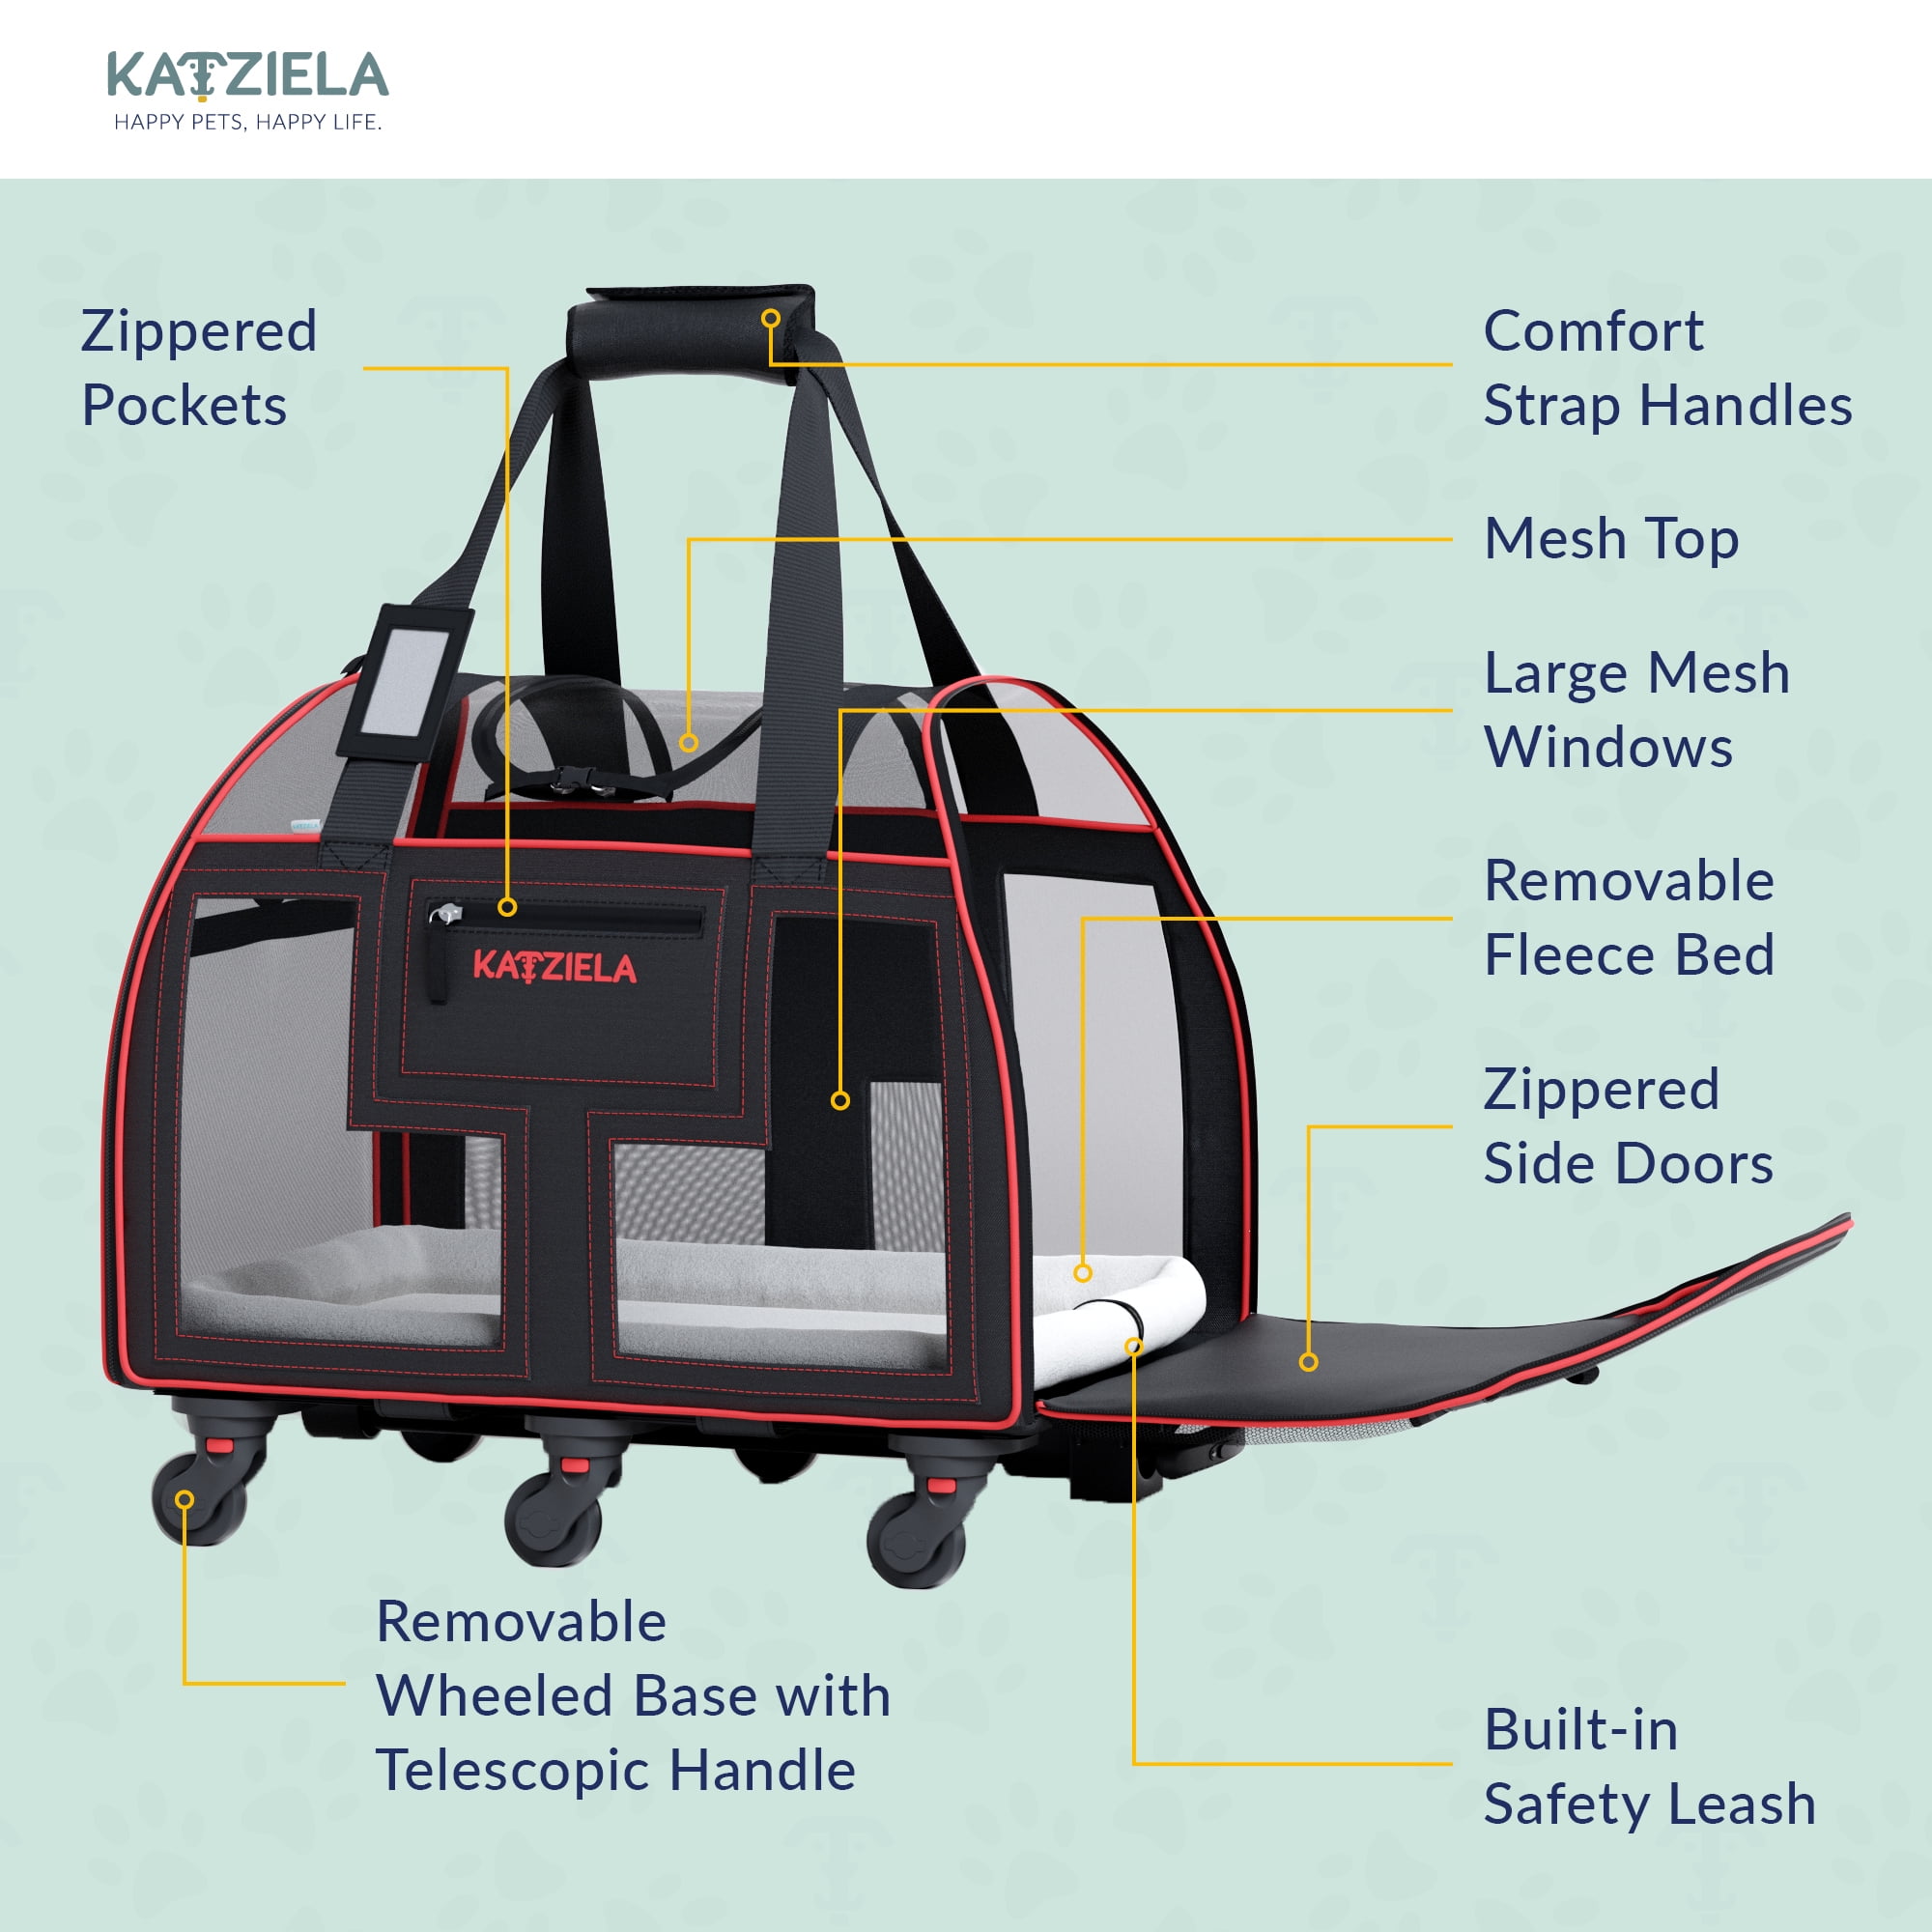 Katziela Luxury Rider Pet Carrier with Removable Wheels and